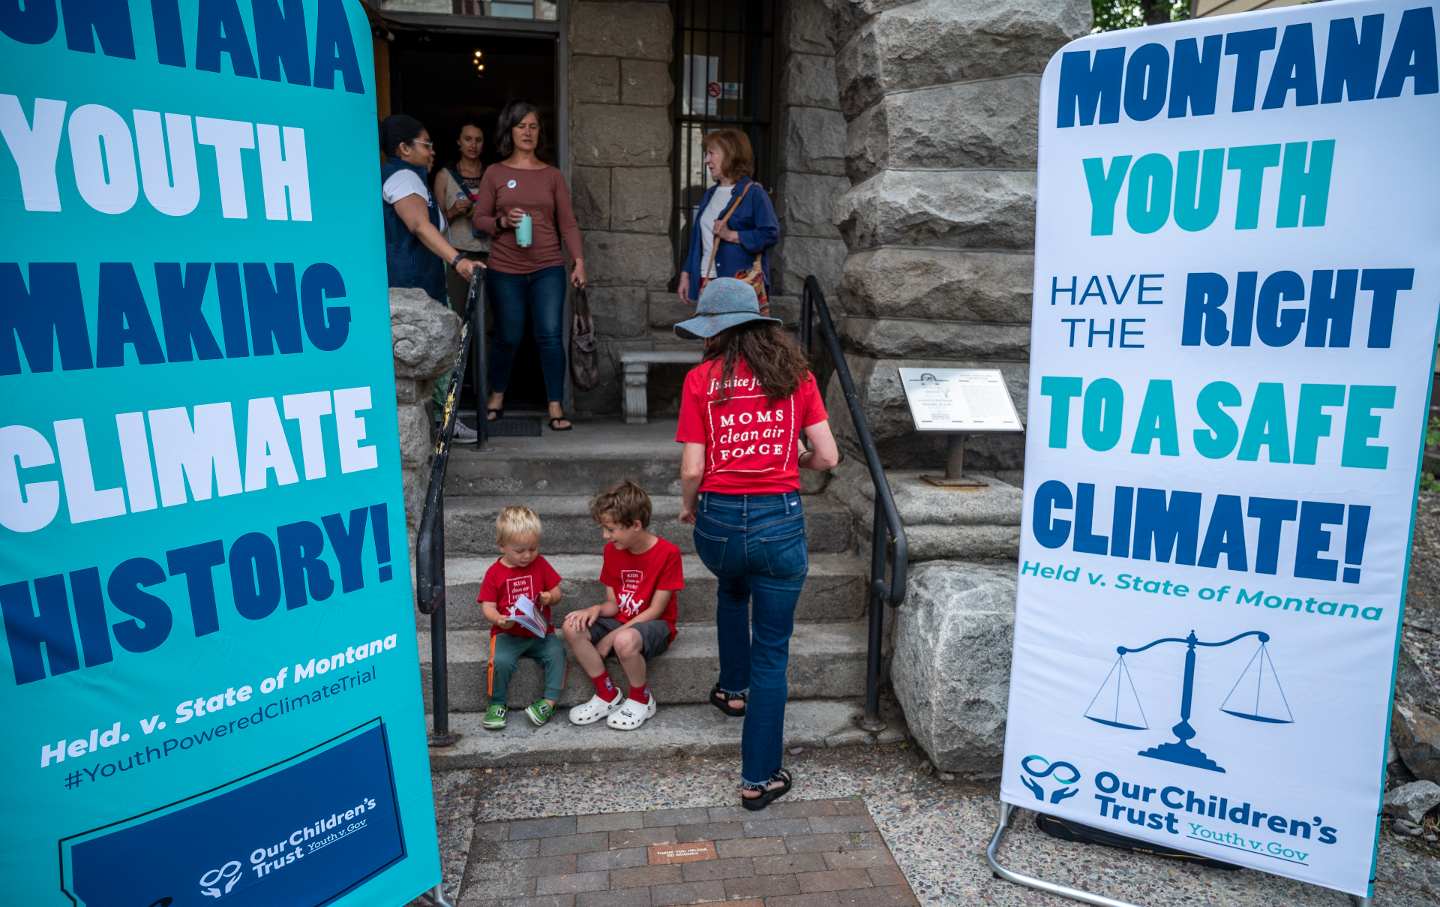 It’s Time for the US to Declare a National Climate Emergency